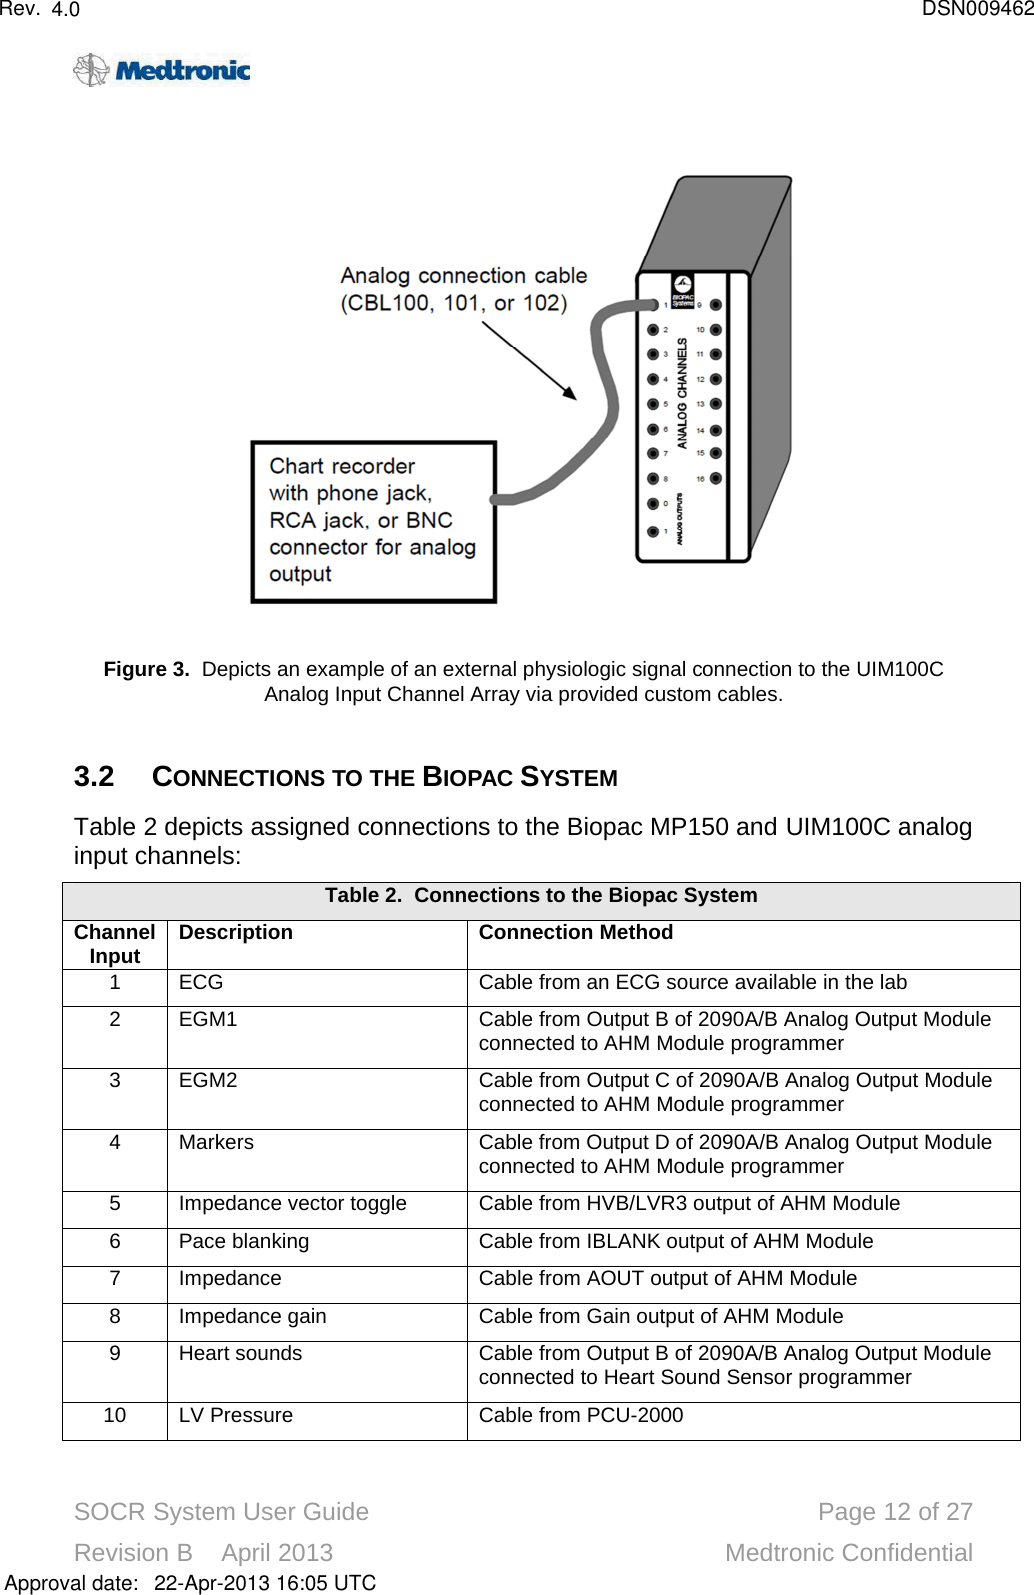 SOCR System User Guide Page 12 of 27Revision B    April 2013 Medtronic ConfidentialFigure 3.  Depicts an example of an external physiologic signal connection to the UIM100C Analog Input Channel Array via provided custom cables.3.2 CONNECTIONS TO THE BIOPAC SYSTEMTable 2depicts assigned connections to the Biopac MP150 and UIM100C analog input channels:Table 2.  Connections to the Biopac SystemChannelInputDescriptionConnection Method1 ECG Cable from an ECG source available in the lab2EGM1Cable from Output B of 2090A/B Analog Output Module connected to AHM Module programmer3EGM2 Cable from Output C of 2090A/B Analog Output Module connected to AHM Module programmer4Markers Cable from Output D of 2090A/B Analog Output Module connected to AHM Module programmer5Impedance vector toggle Cable from HVB/LVR3 output of AHM Module6Pace blanking Cable from IBLANK output of AHM Module7Impedance  Cable from AOUT output of AHM Module8Impedance gain Cable from Gain output of AHM Module9Heart sounds Cable from Output B of 2090A/B Analog Output Module connected to Heart Sound Sensor programmer10 LV Pressure Cable from PCU-2000Approval date:4.0 DSN00946222-Apr-2013 16:05 UTCRev.